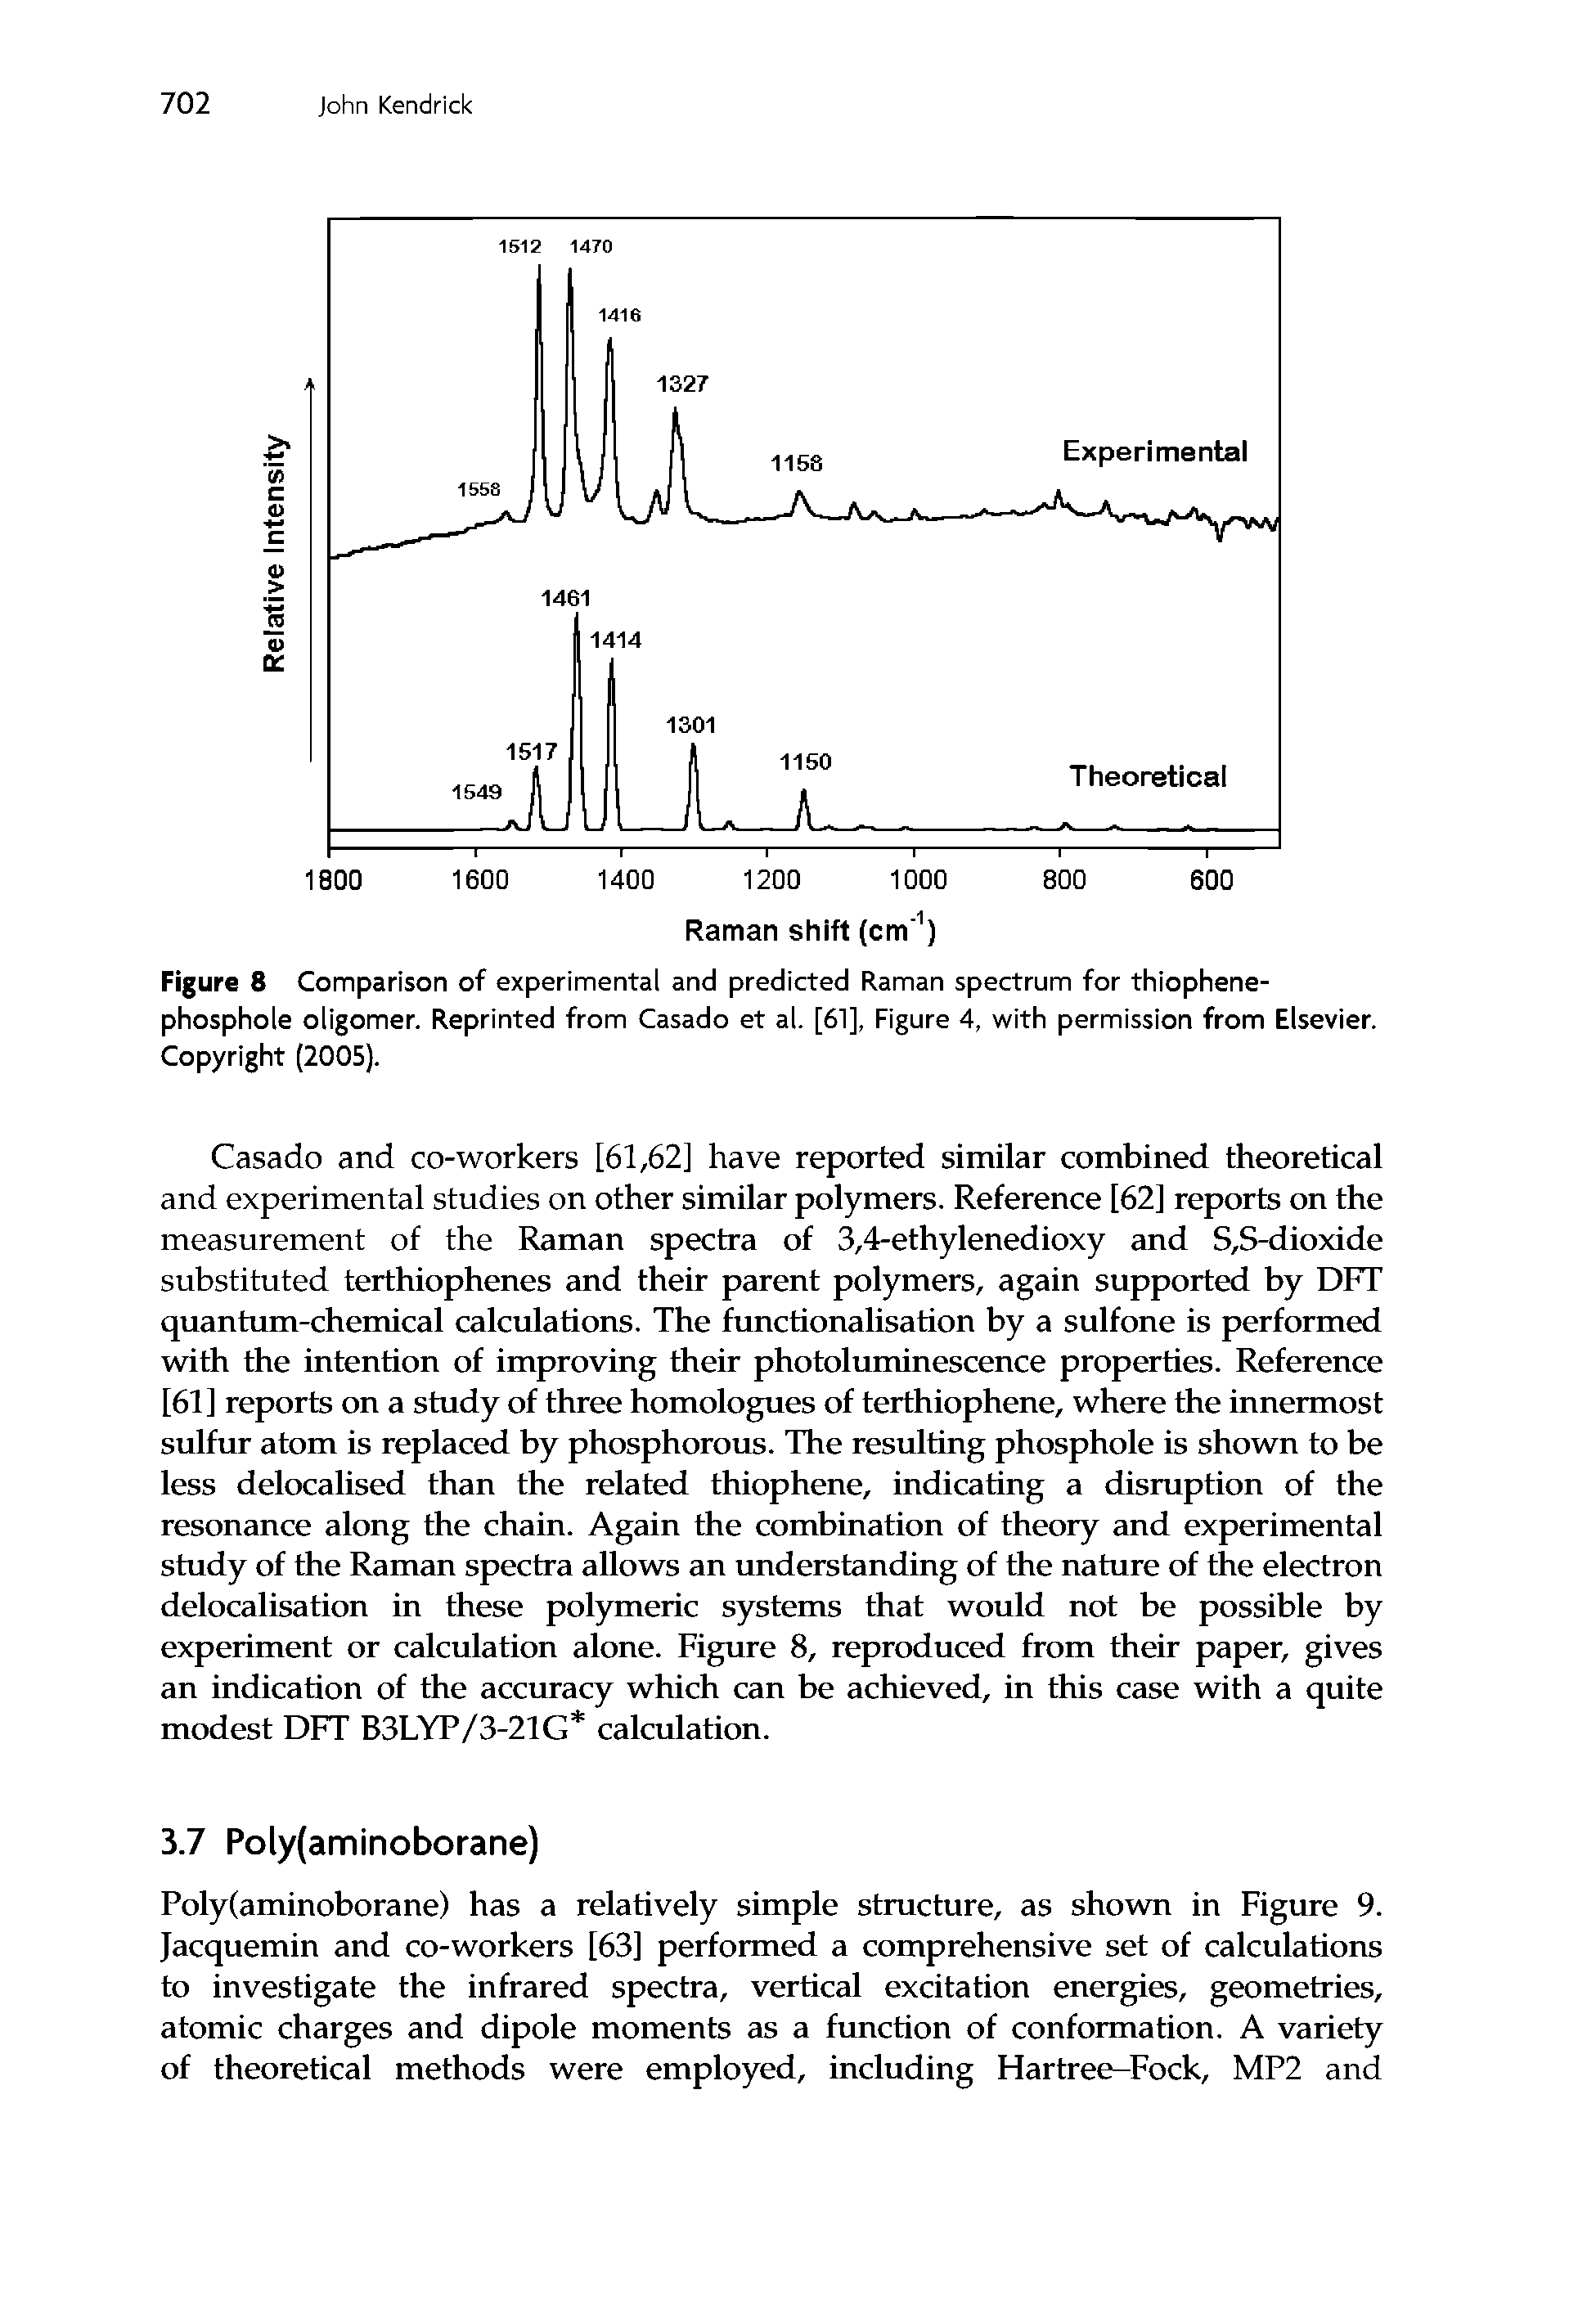 Figure 8 Comparison of experimental and predicted Raman spectrum for thiophene-phosphole oligomer. Reprinted from Casado et al. [61], Figure 4, with permission from Elsevier. Copyright (2005).